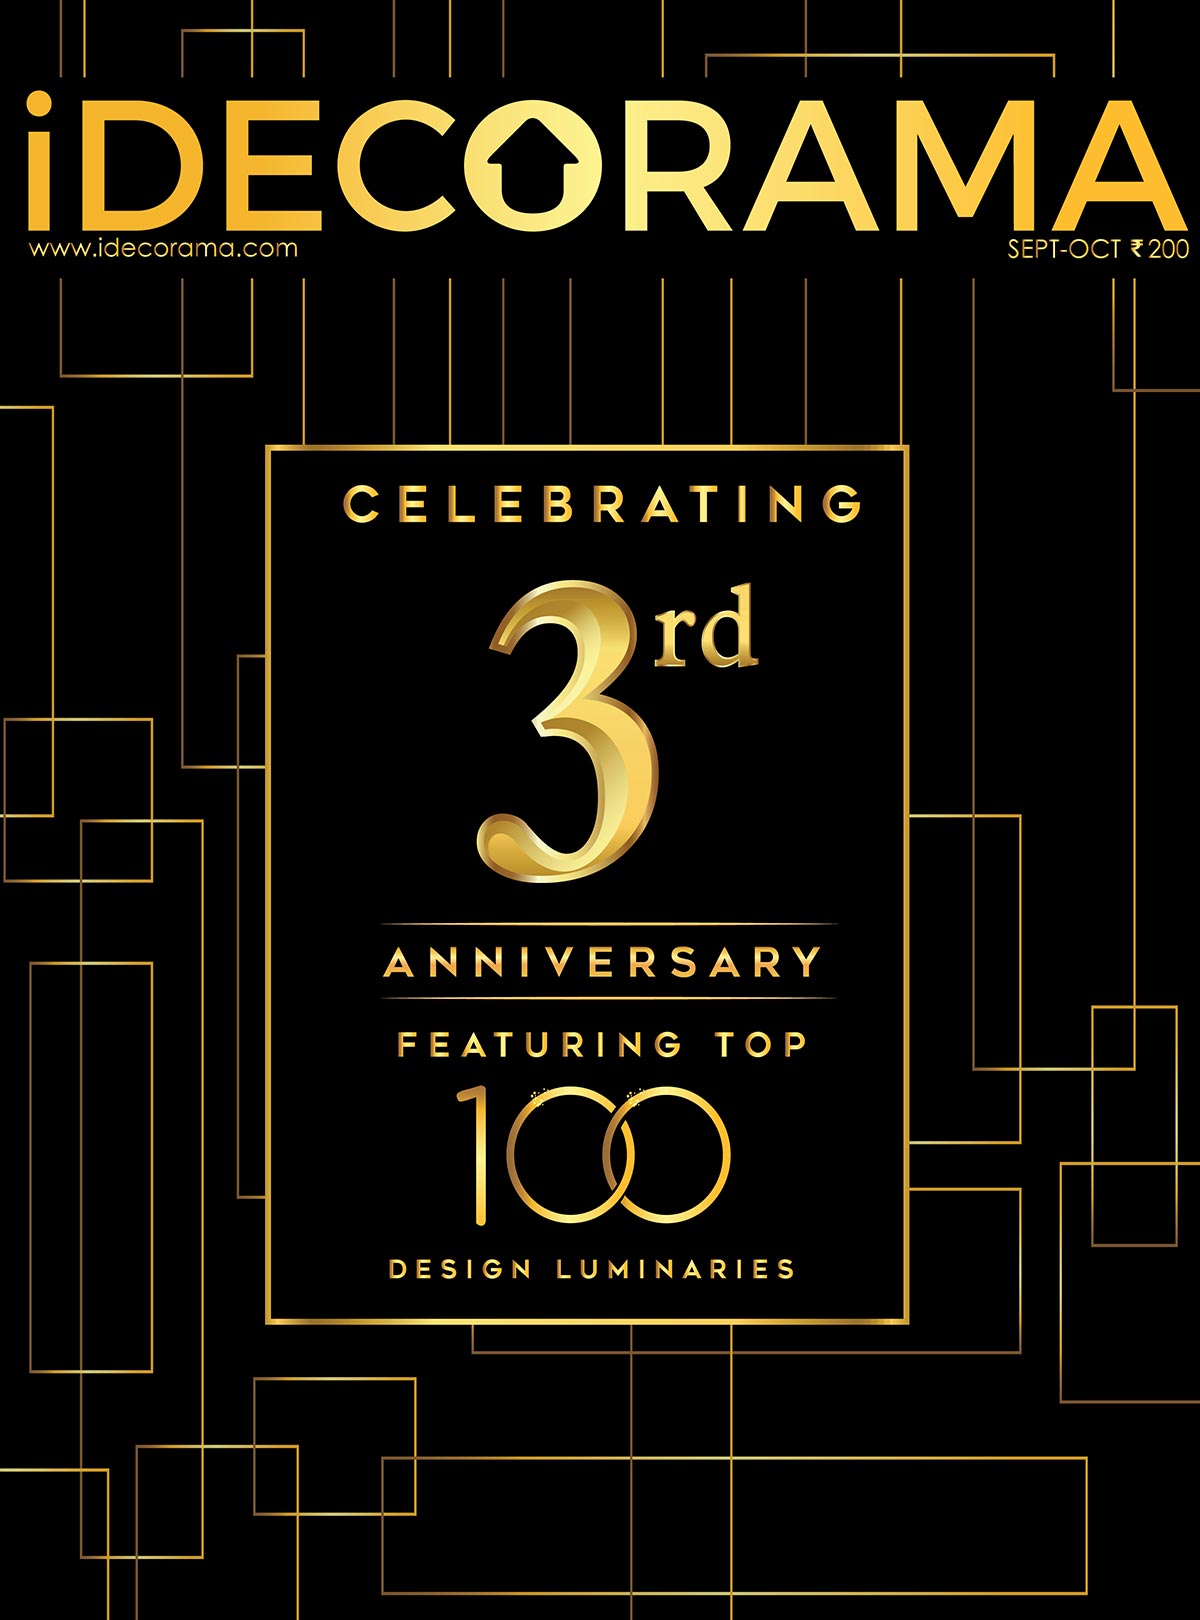 idecorama-magazine-feature-lijo-reny-architects-among-top-100-design-luminaries-in-their-3rd-anniversary-issue-2